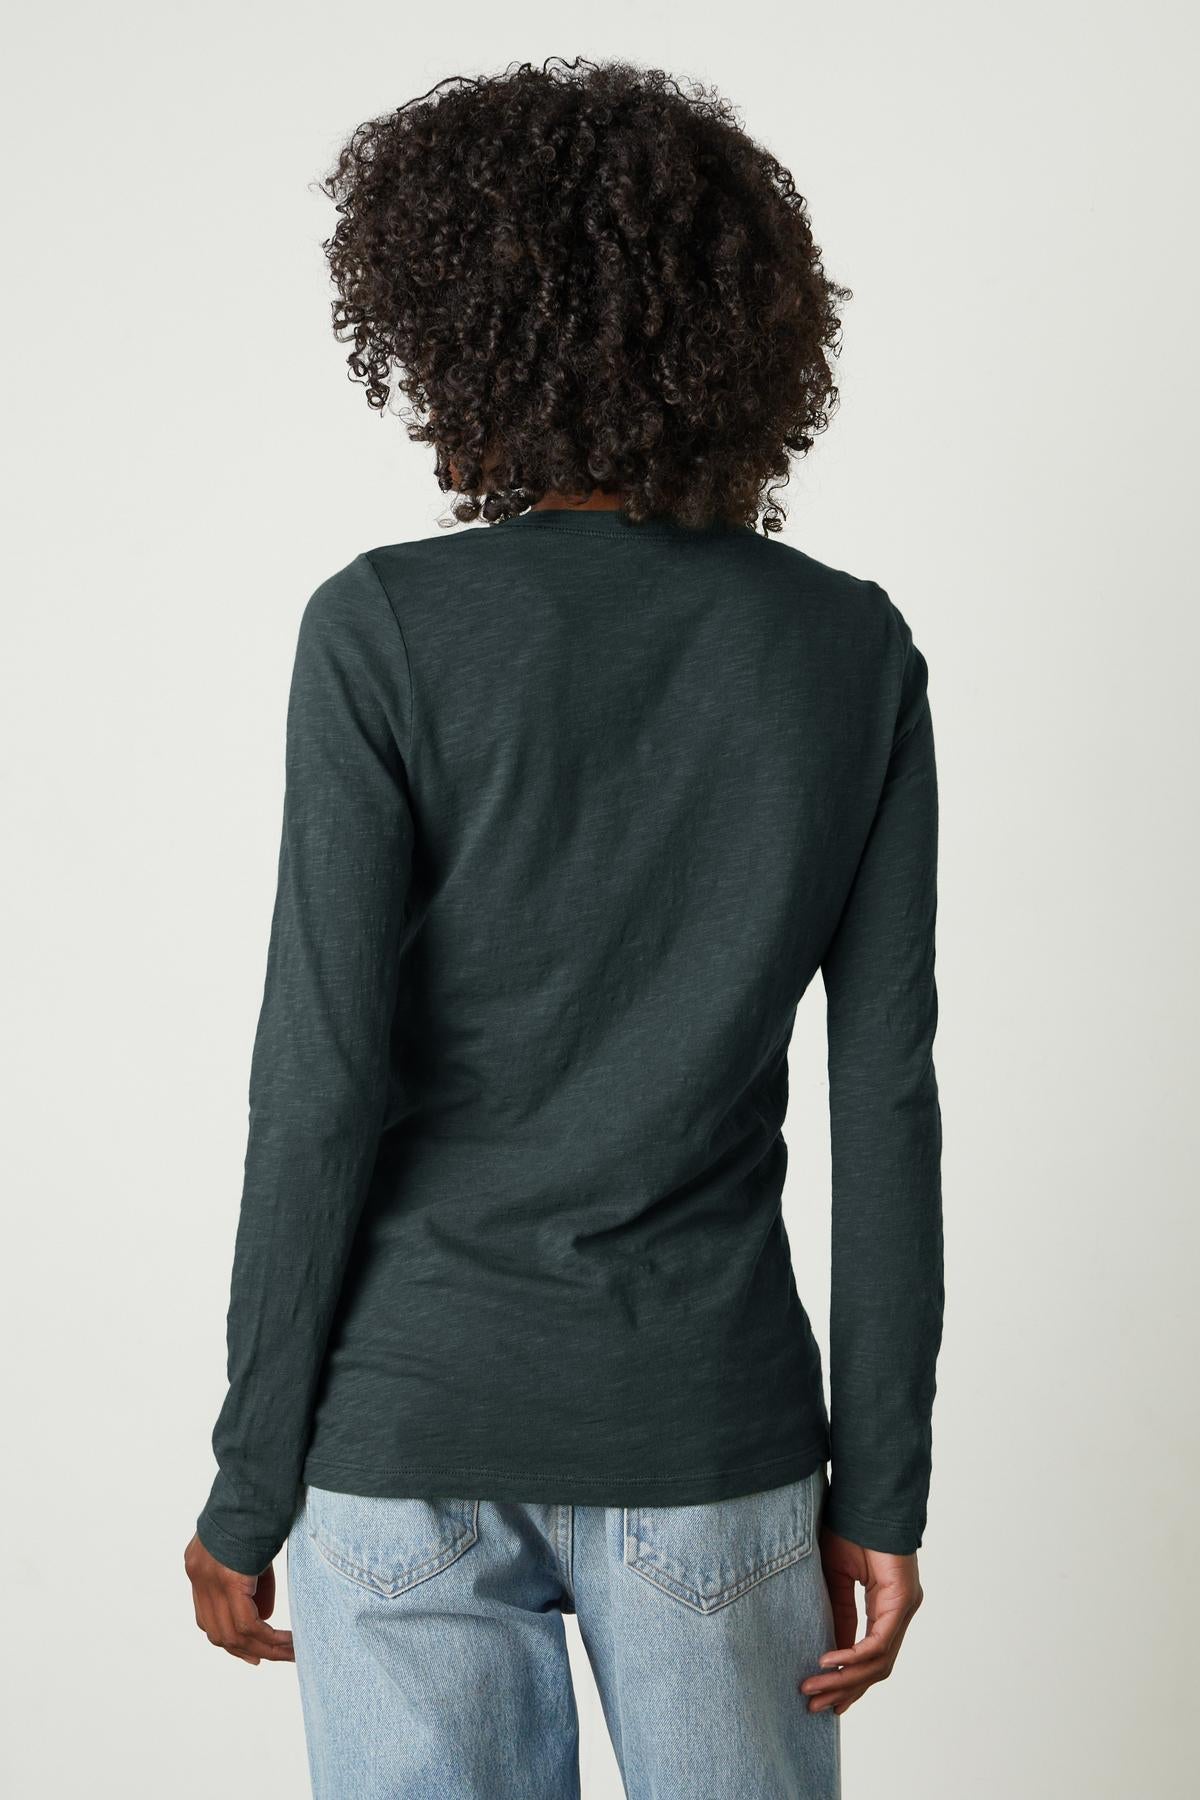 The back view of a woman wearing Velvet by Graham & Spencer's BLAIRE ORIGINAL SLUB TEE jeans.-35782759481537